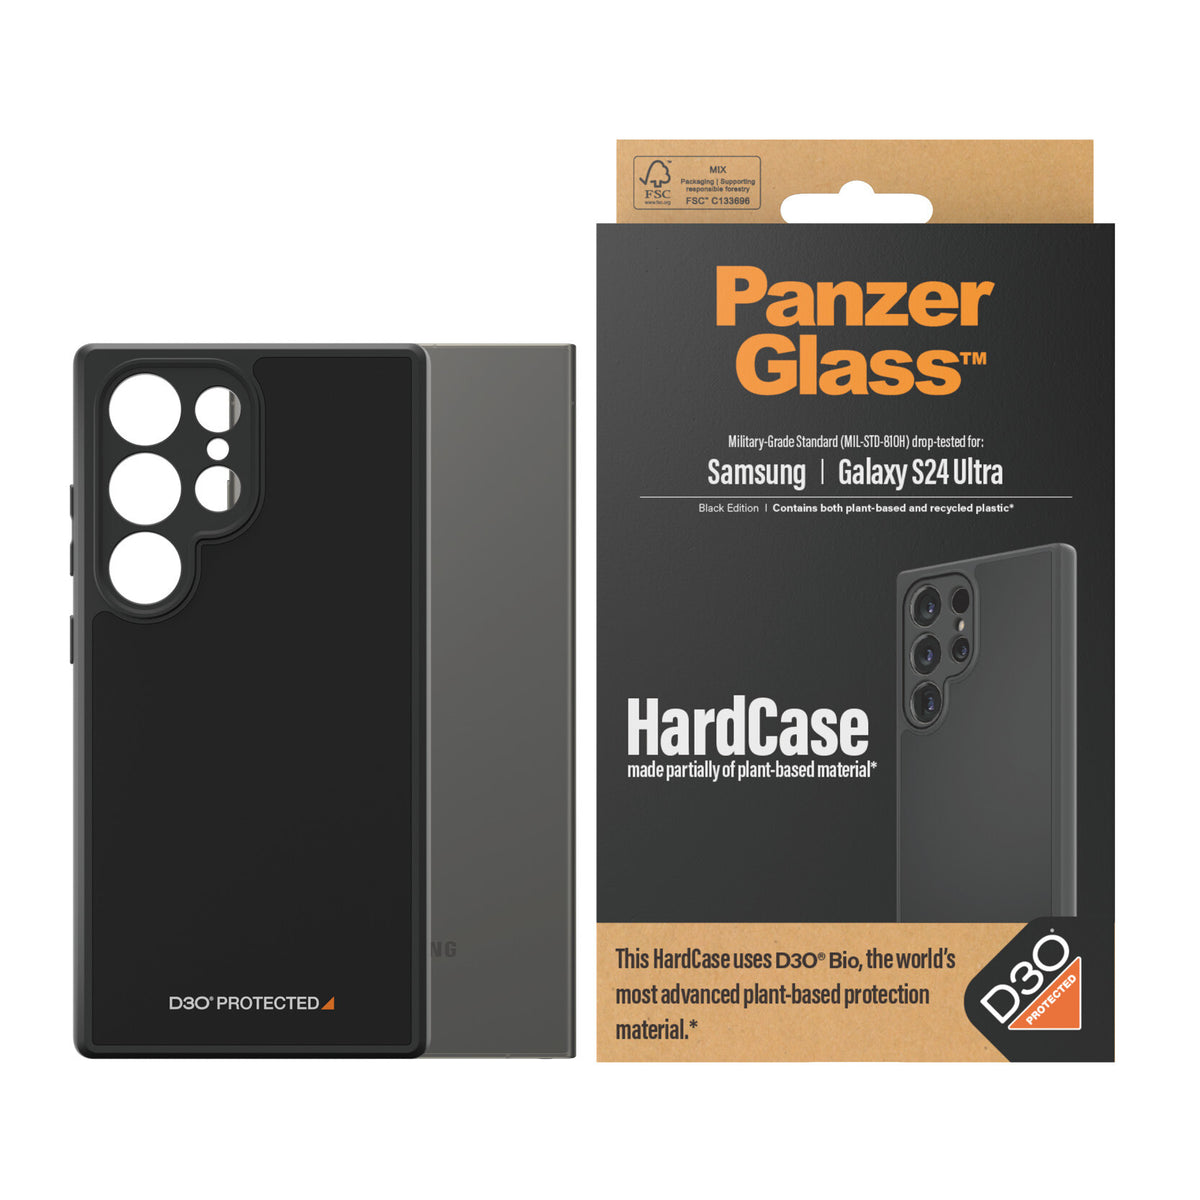 PanzerGlass ® HardCase with D3O® for Galaxy S24 Ultra in Black